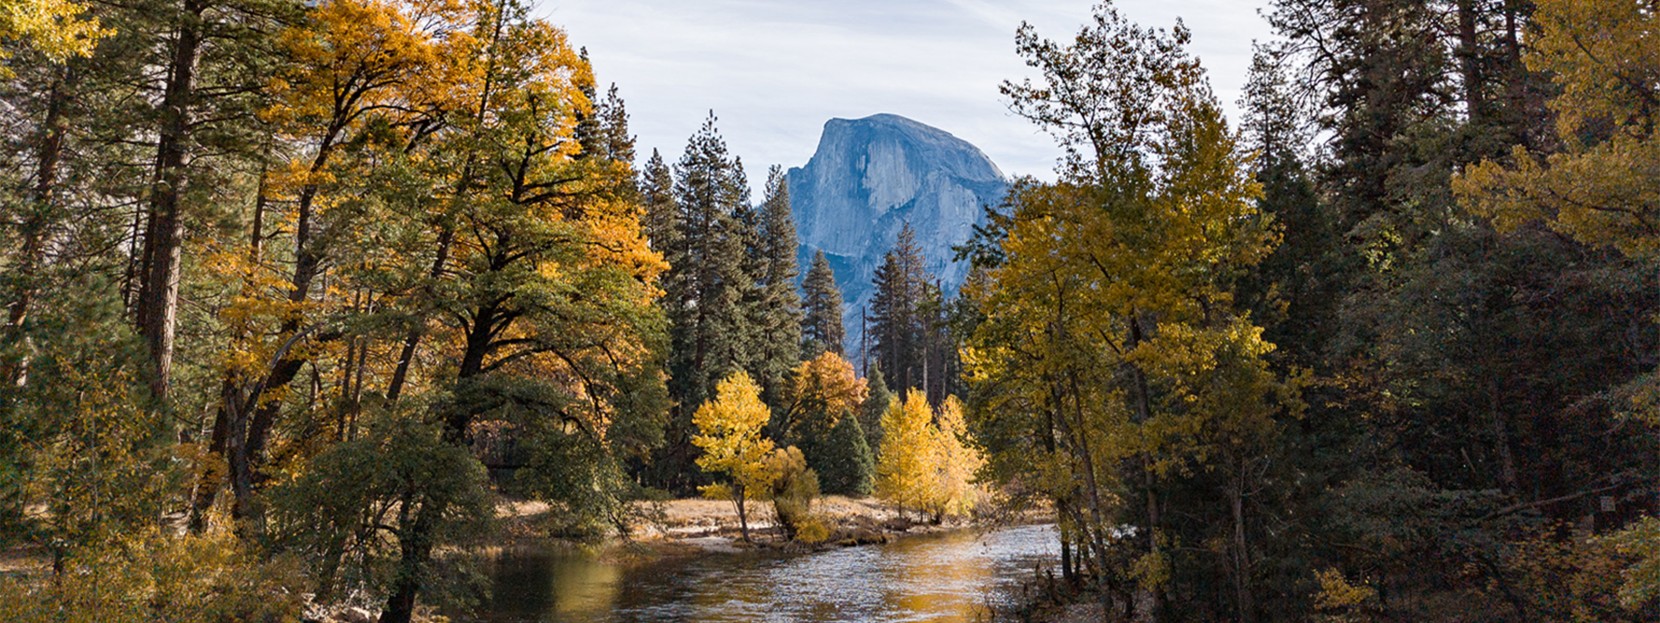 A beautiful peak in the background and a tree-lined river in the foreground in Yosemite National Park.